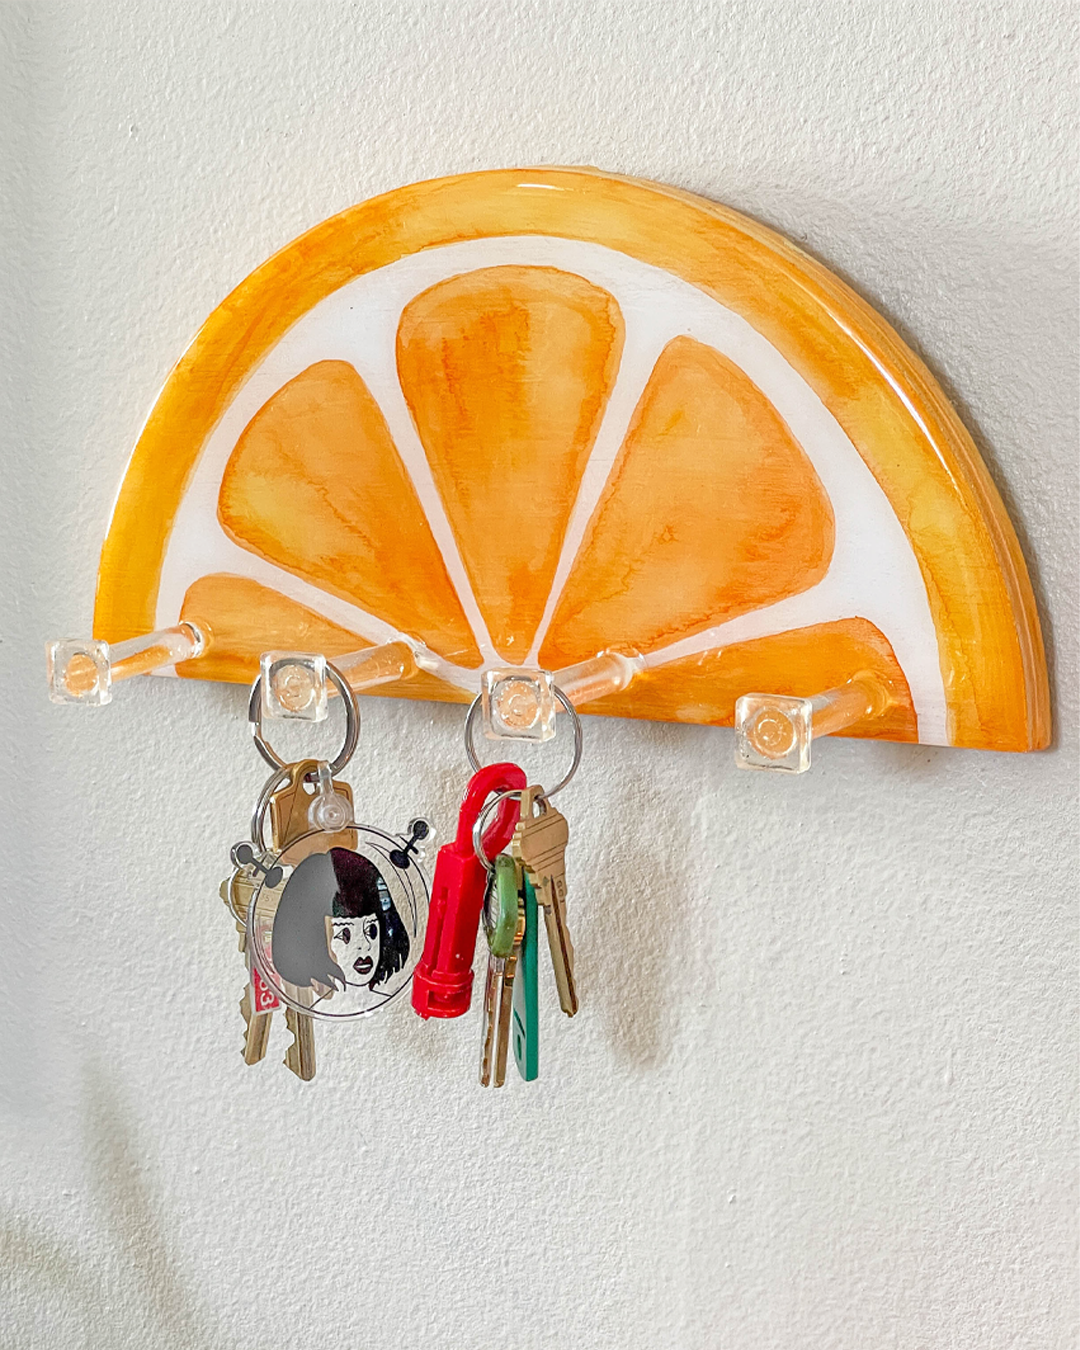 Artistic and functional key holder in the shape of an orange slice, handcrafted for home decor.